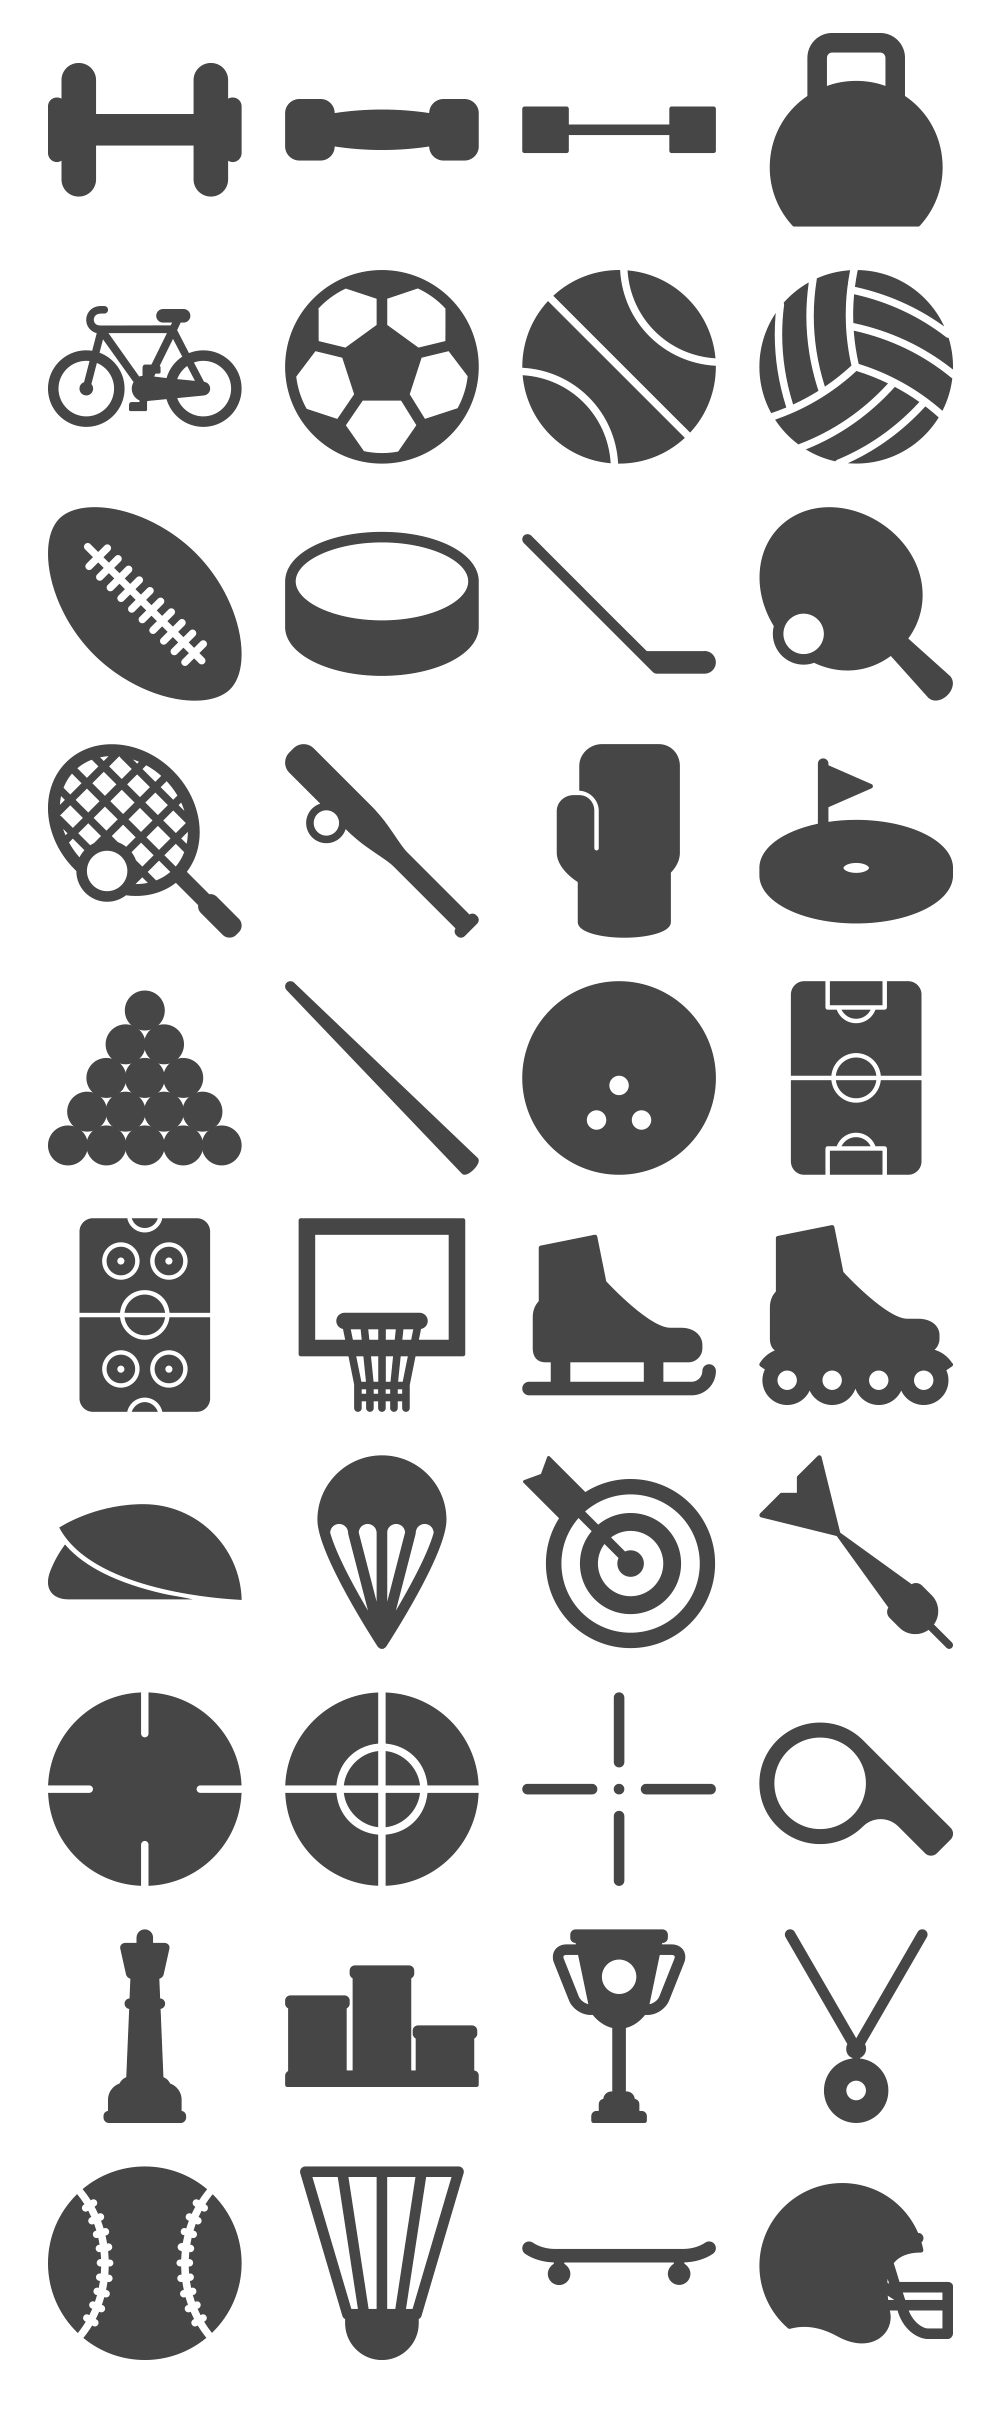 Free Sports Icons Vector - Download Free Vector Art, Stock 